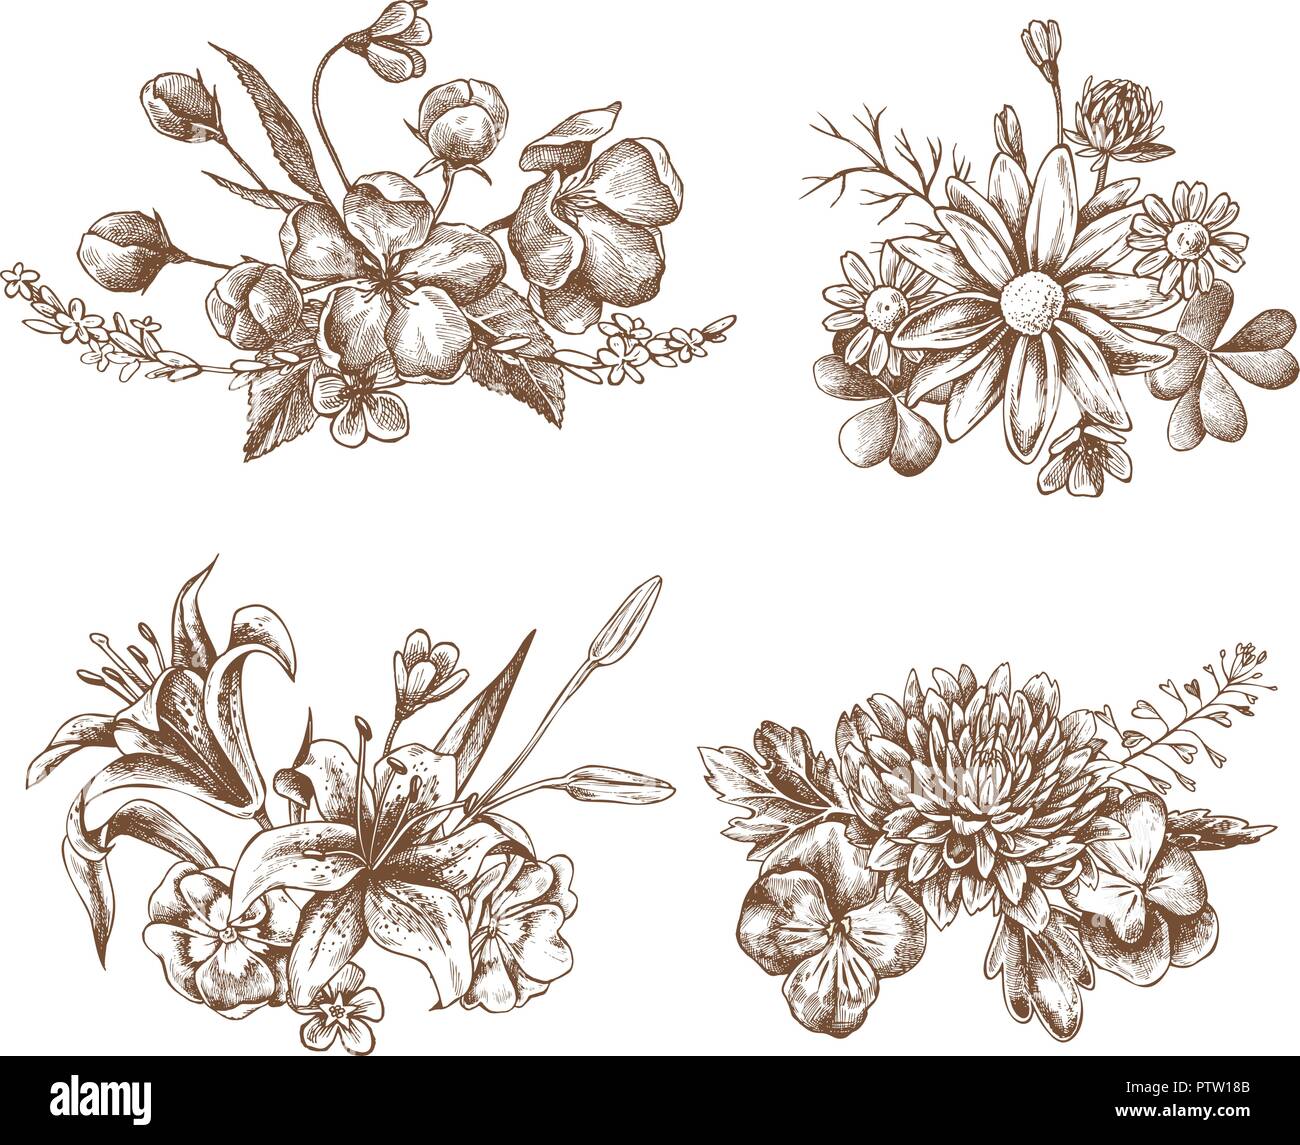 Vector collection of hand drawn heartseases, asters, primulas, Stock Vector